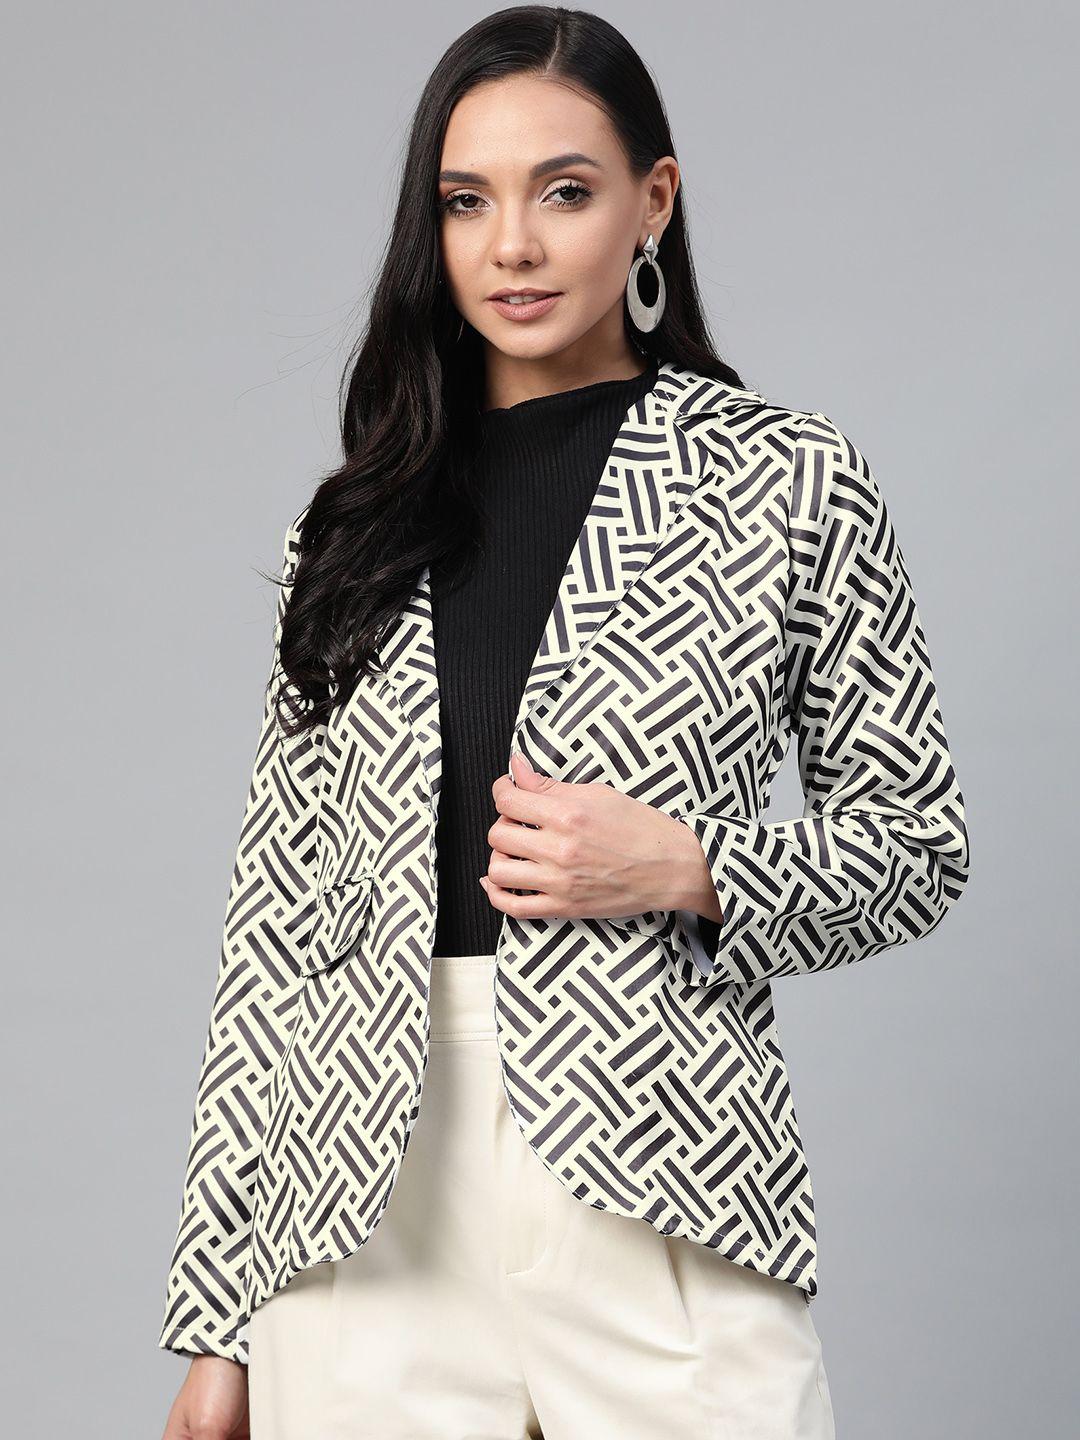 jompers women off-white and black satin printed smart casual blazer